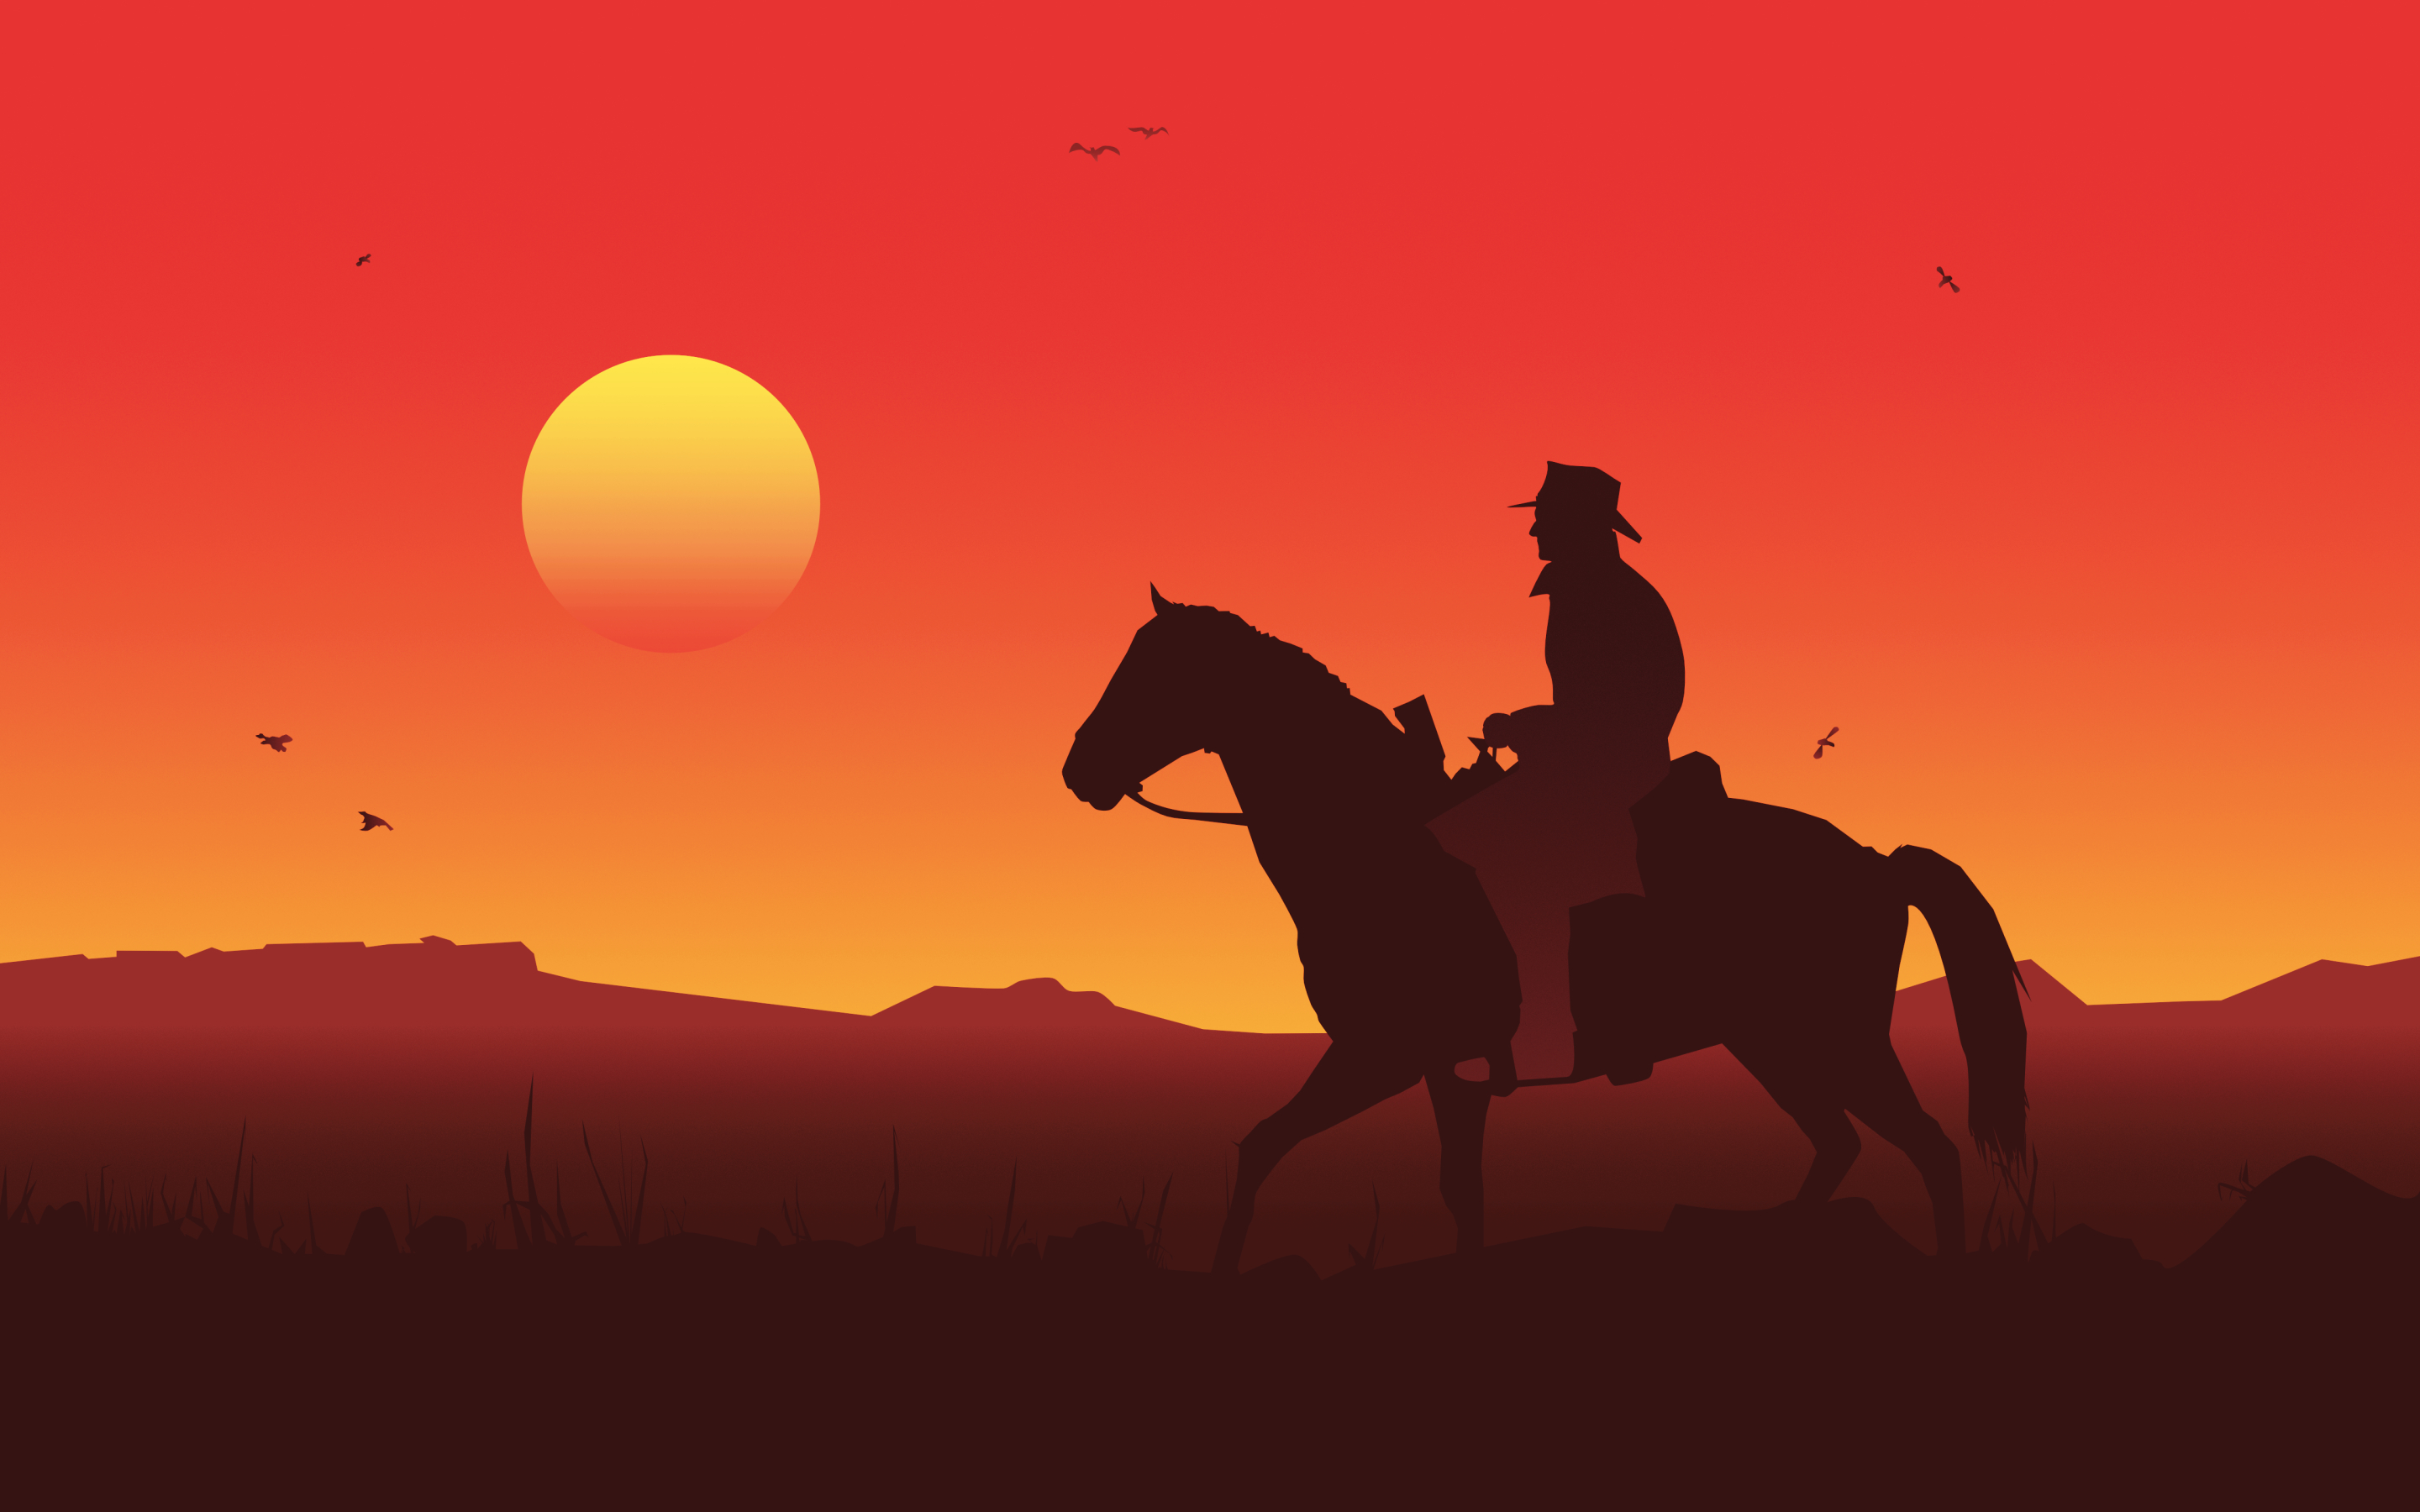 Wallpaper Of Red Dead Redemption 2, Video Game, Minimalism - Red Dead Redemption 2 Wallpaper 4k - HD Wallpaper 